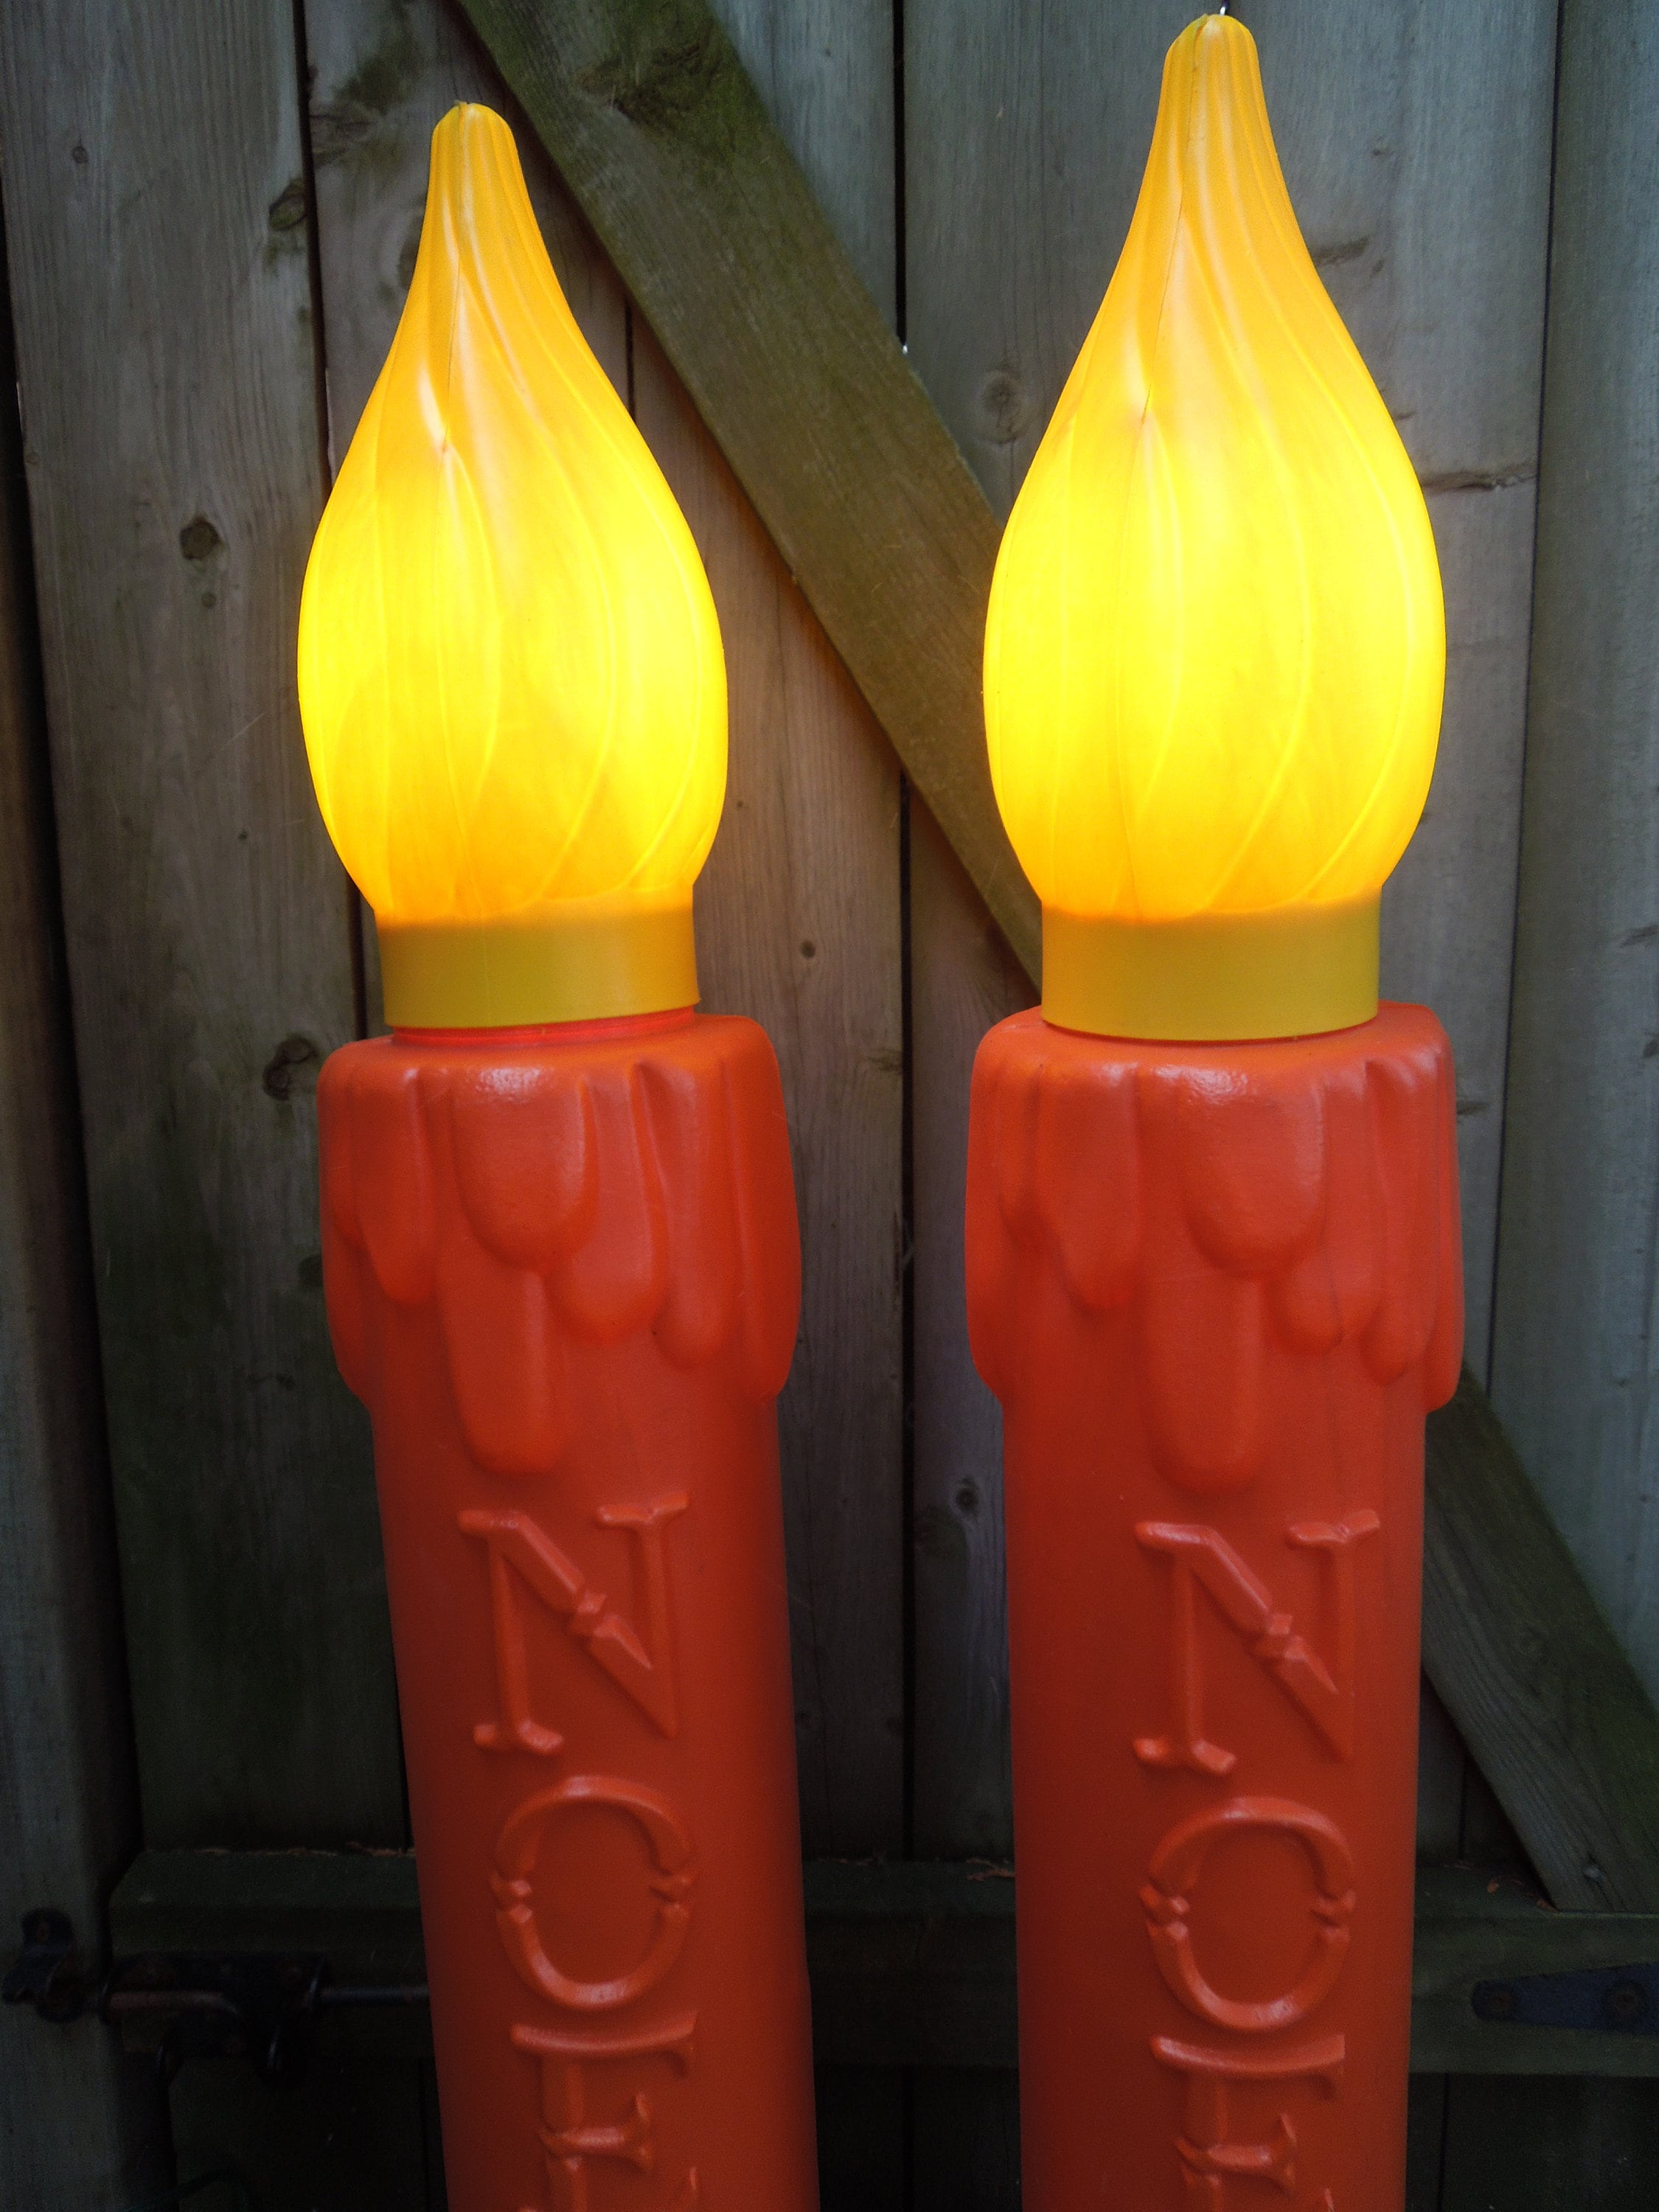 Pair of Vintage Christmas Large Blow Mold Candles, Light up Lawn ...